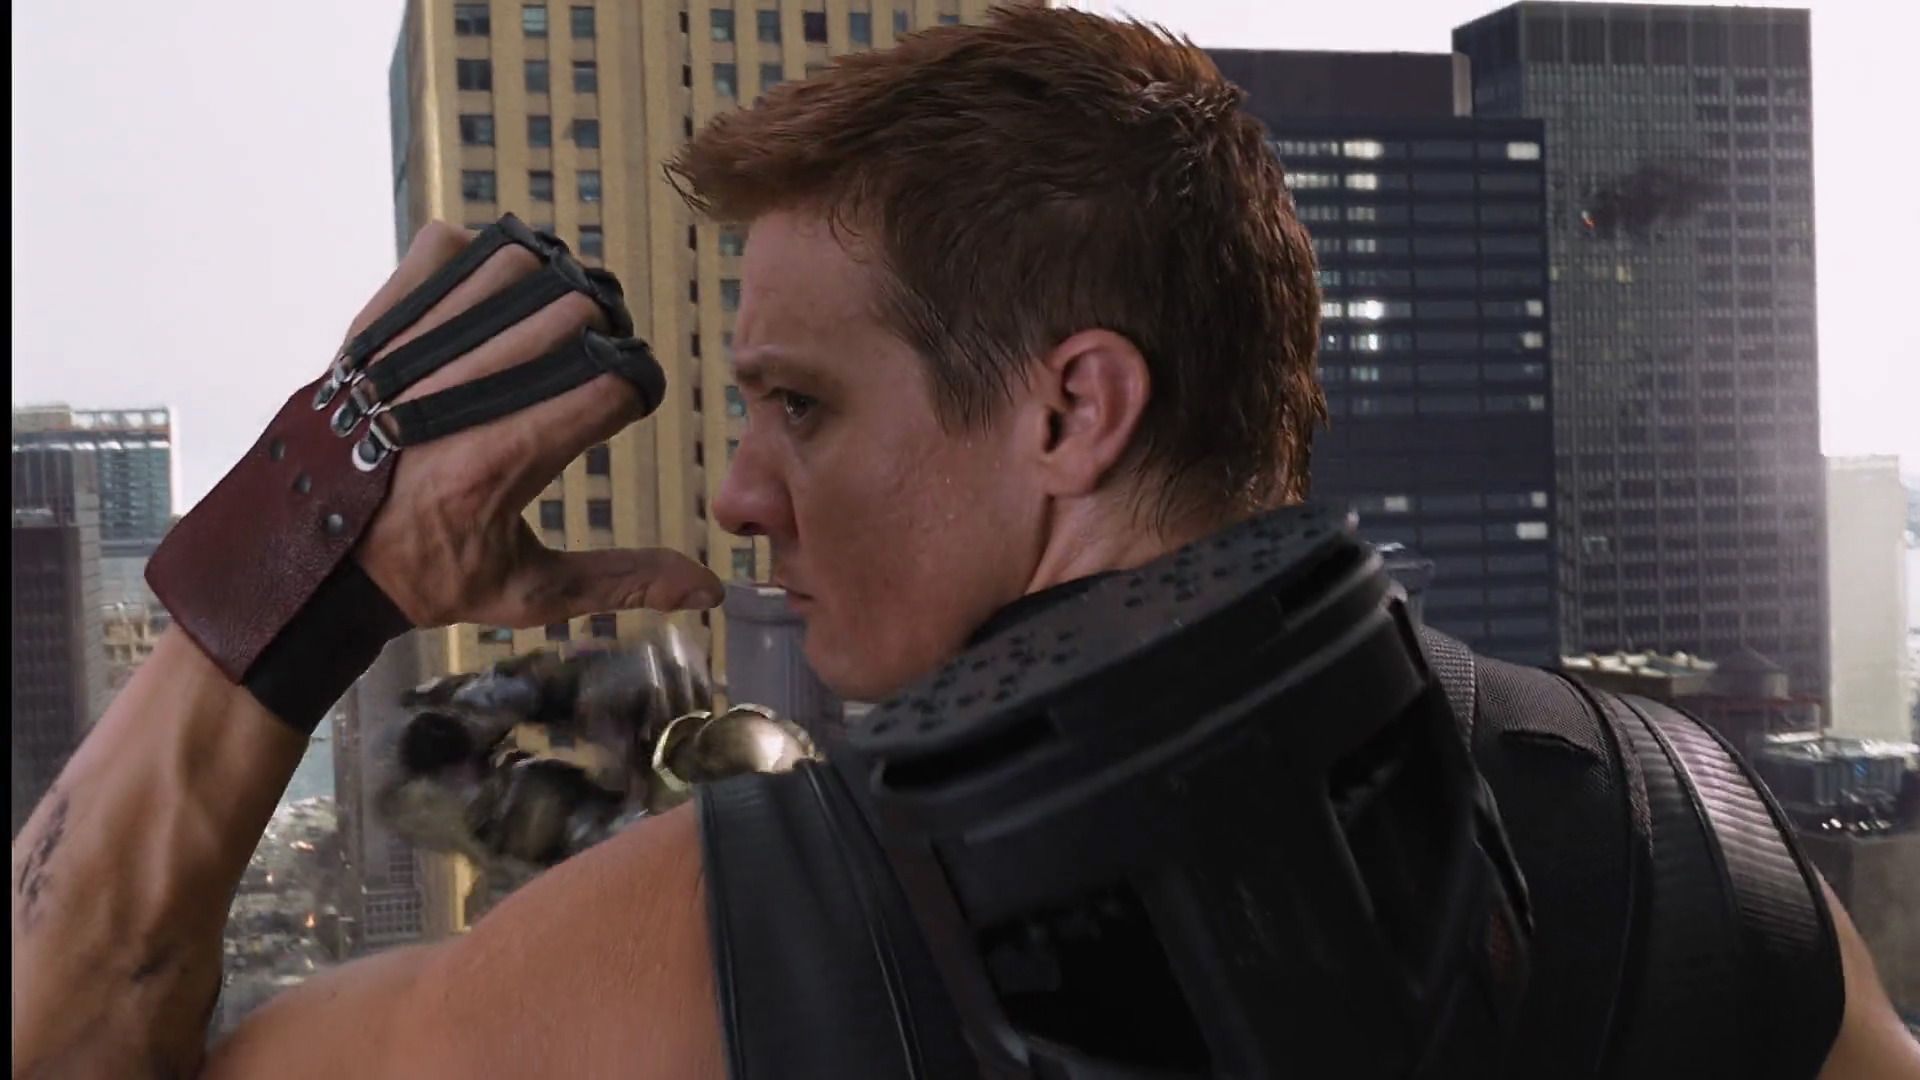 THIS IS THE HAIRSTYLE I WANT. Jeremy renner, Clint barton, Hawkeye